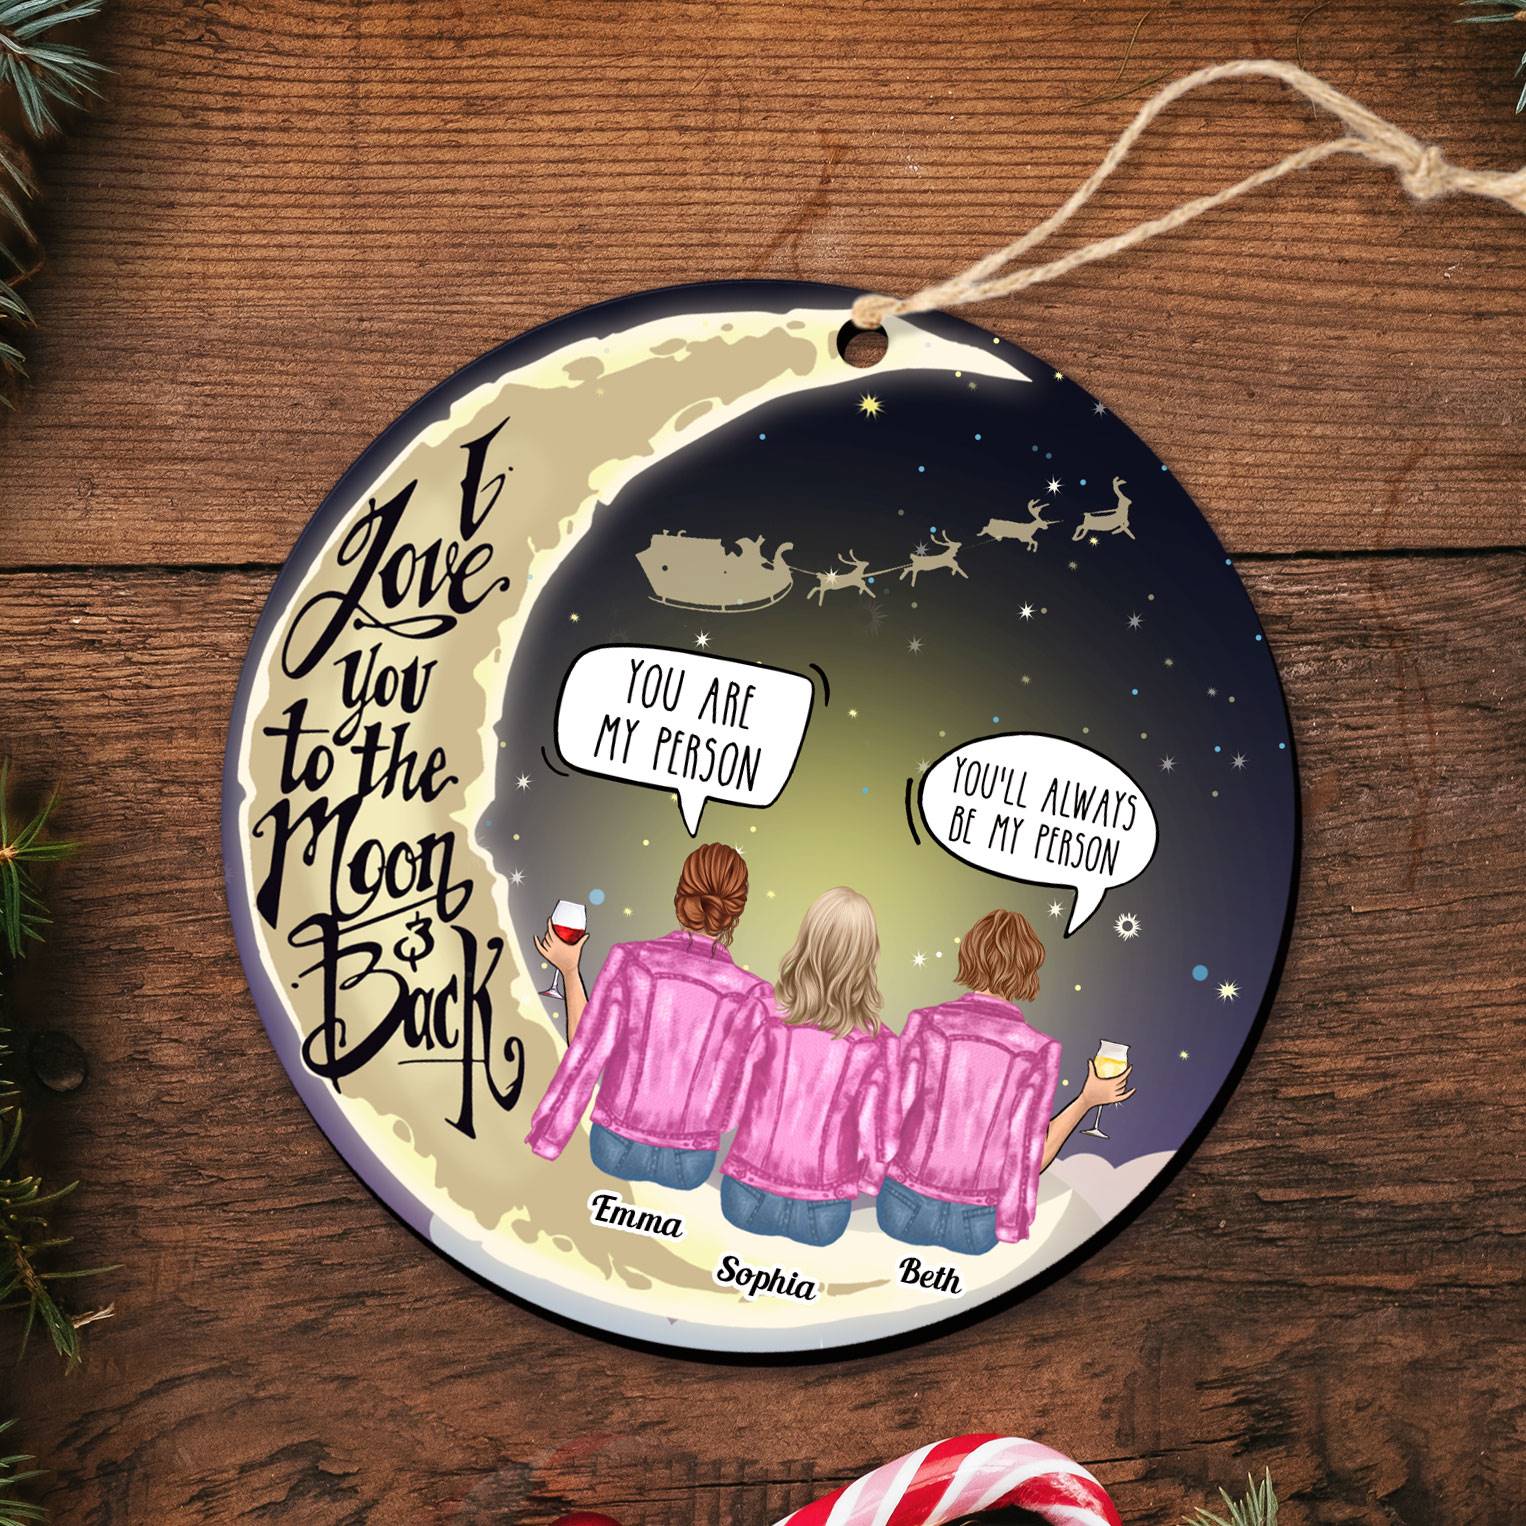 Love You To The Moon - Personalized Wooden Ornament - Christmas Decoration Gift For Besties Sisters Friends